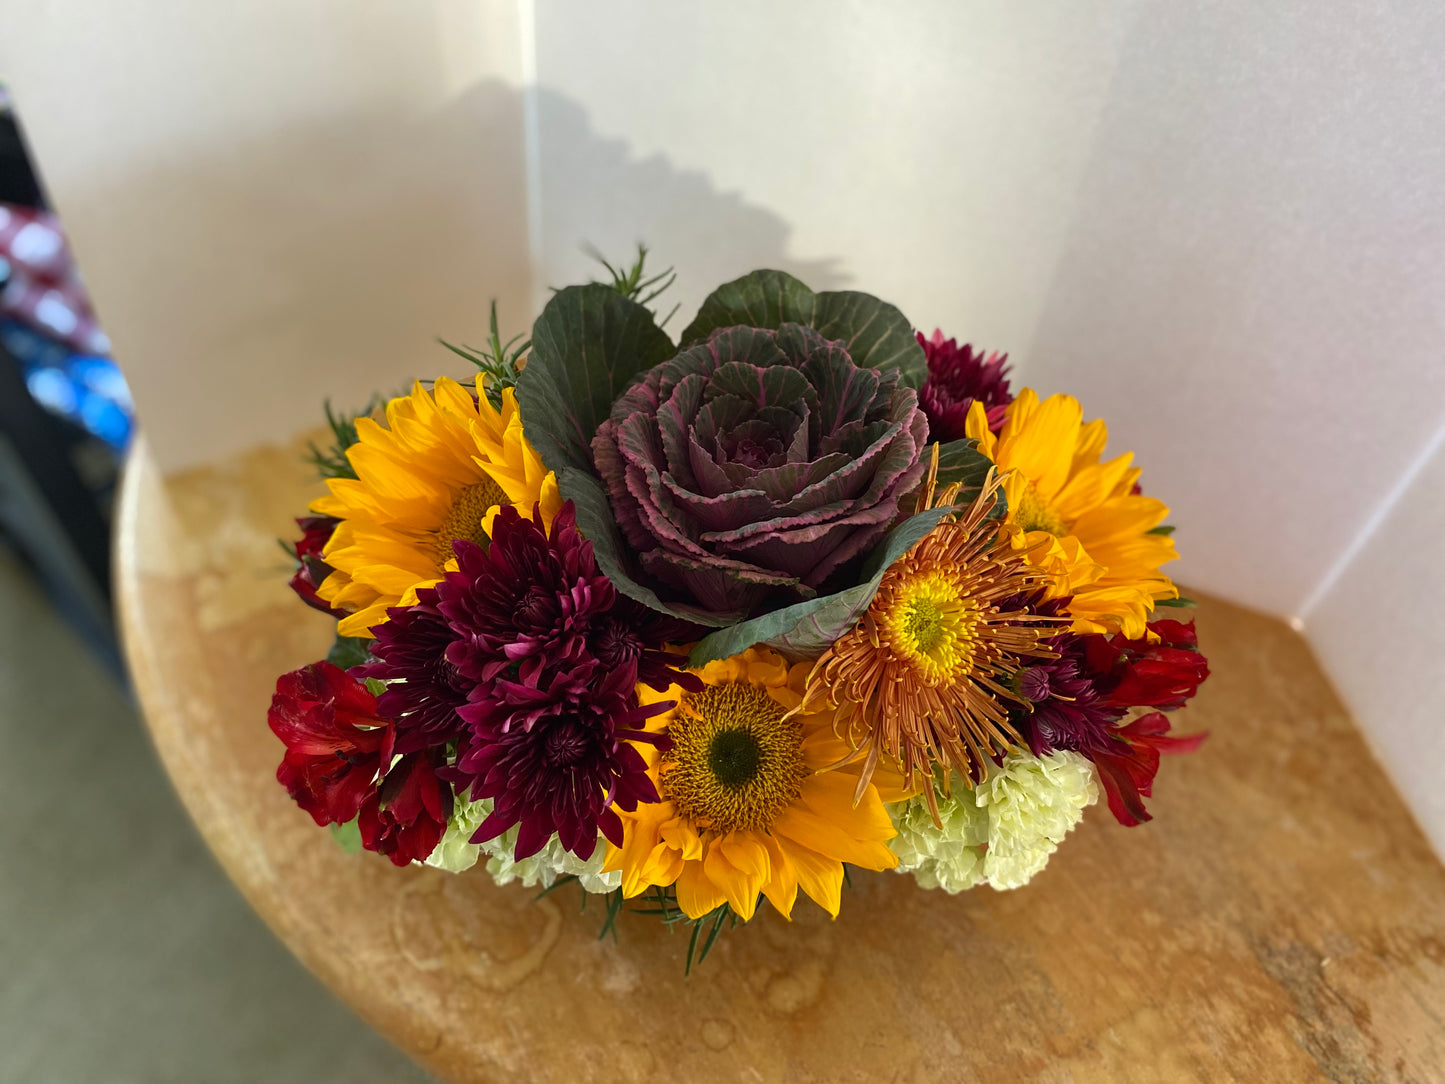 Flower Subscription - monthly delivered arrangements every 2 weeks